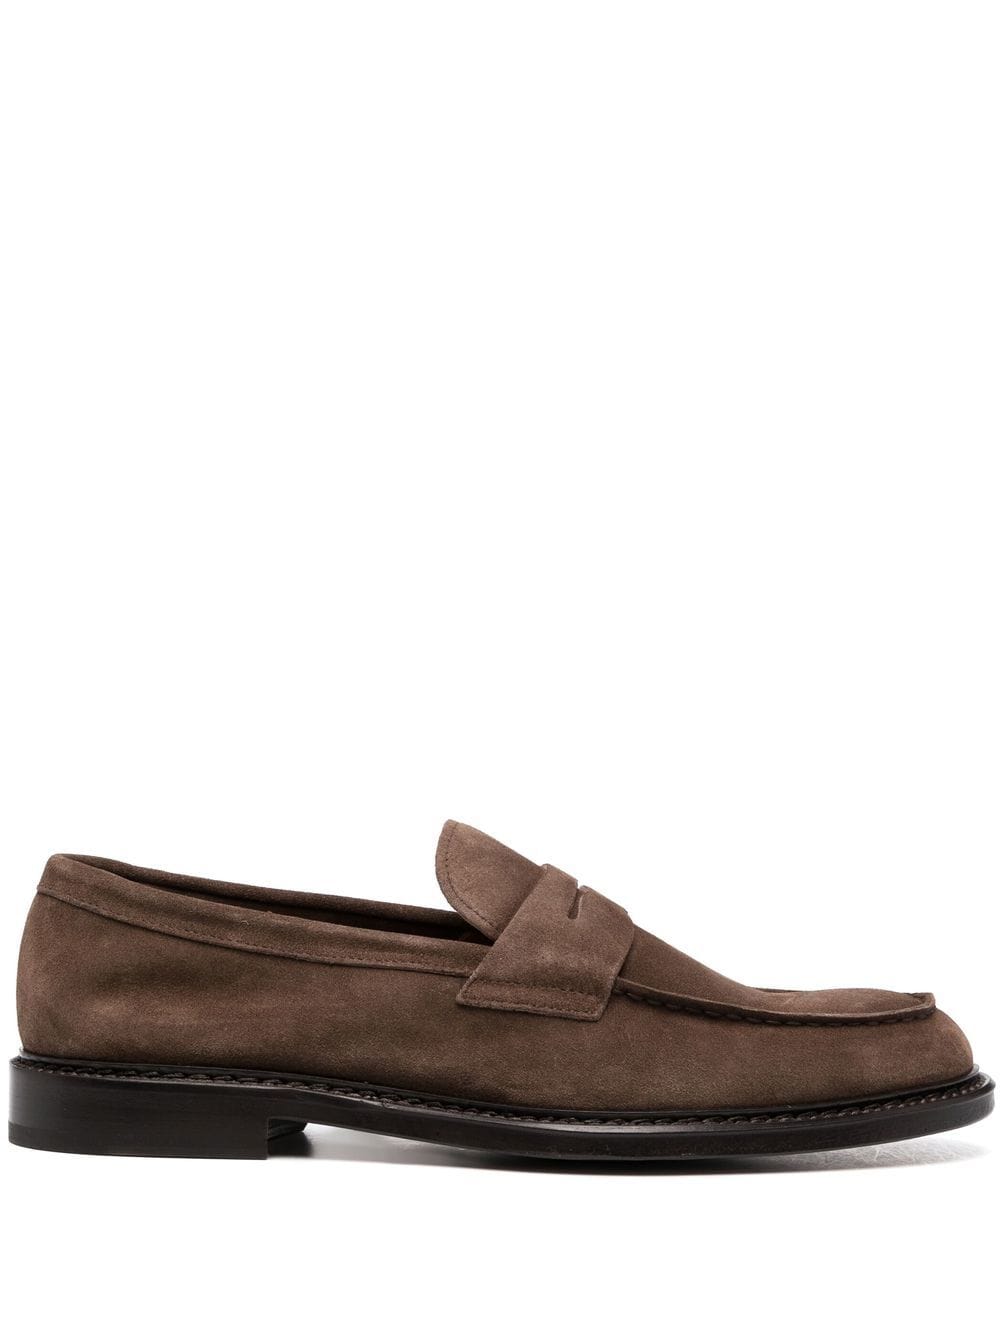 Doucal's classic suede loafers - Brown von Doucal's